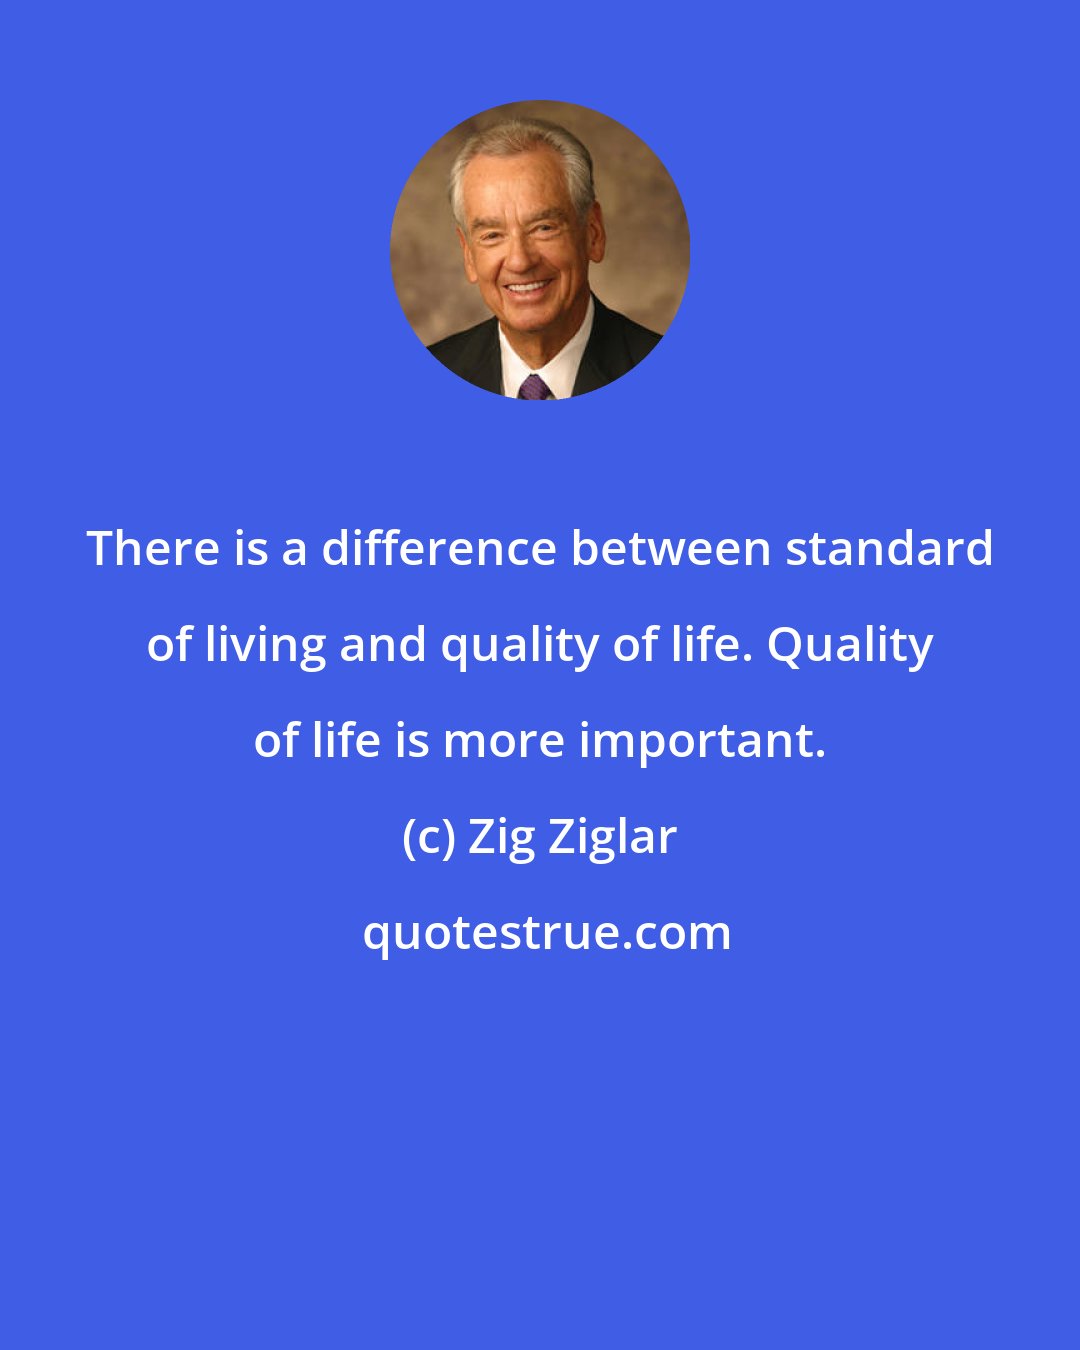 Zig Ziglar: There is a difference between standard of living and quality of life. Quality of life is more important.